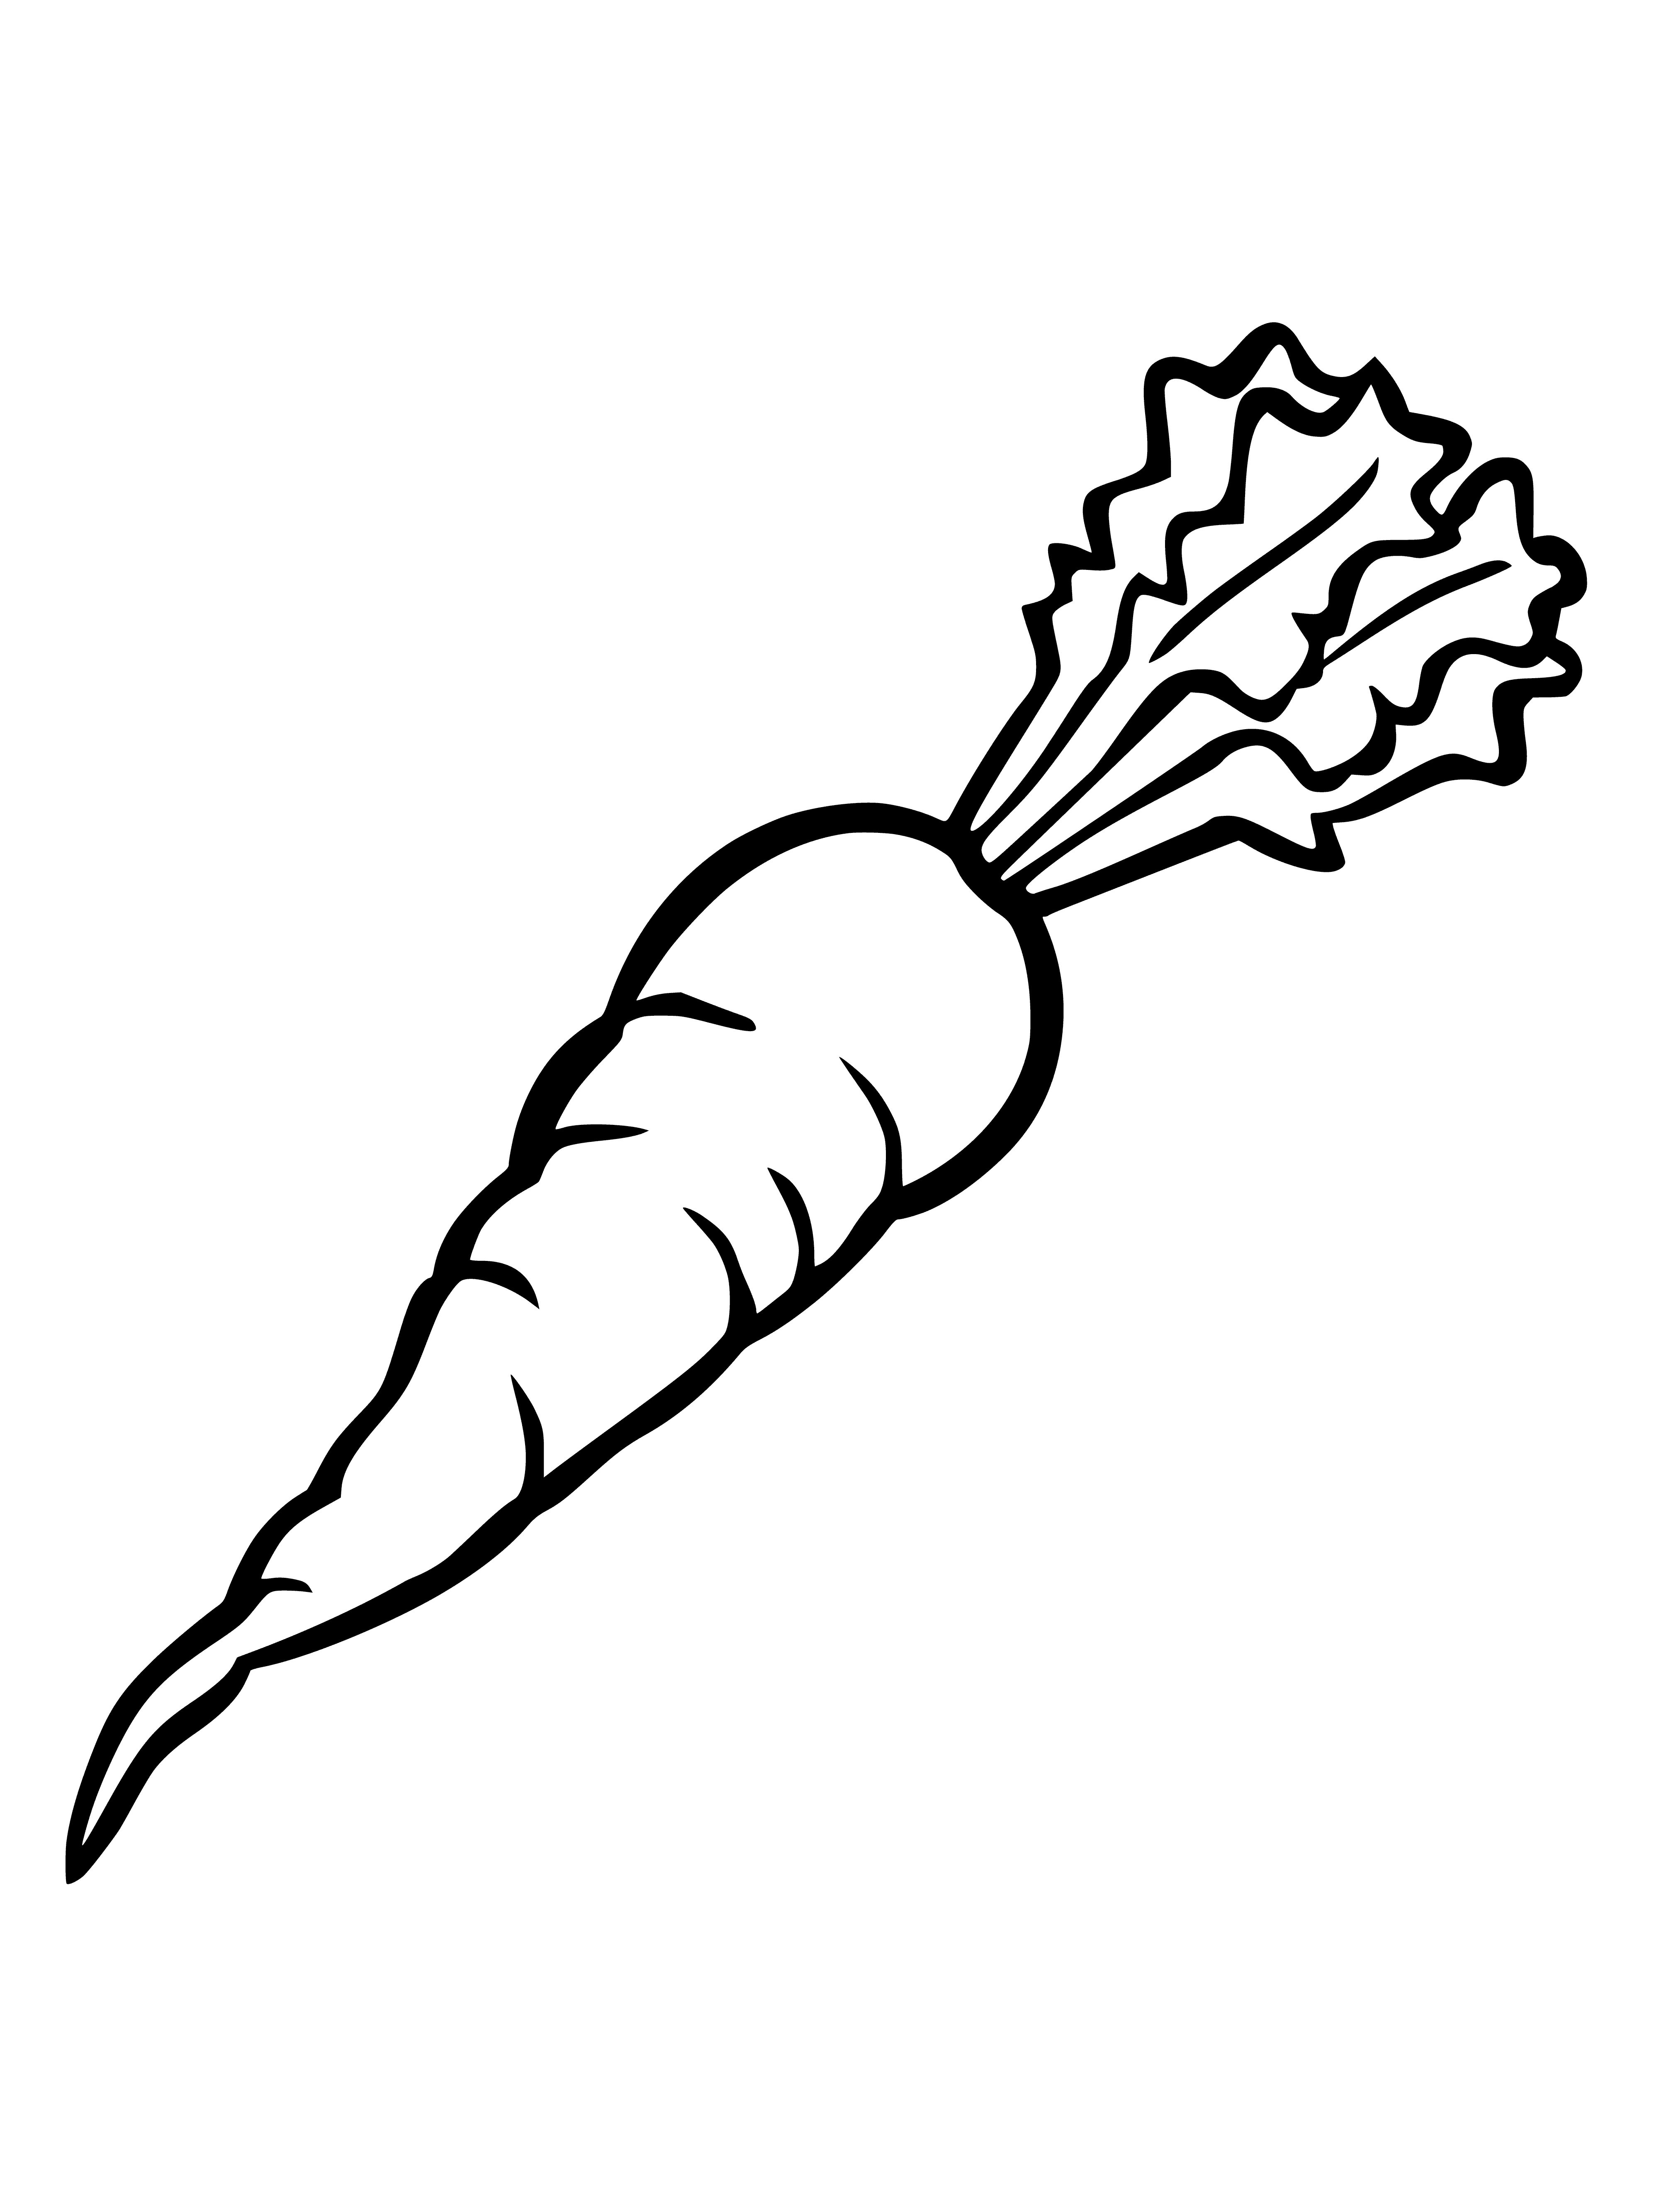 coloring page: Carrot on plate with knife: long orange veg, bumps & ridges.